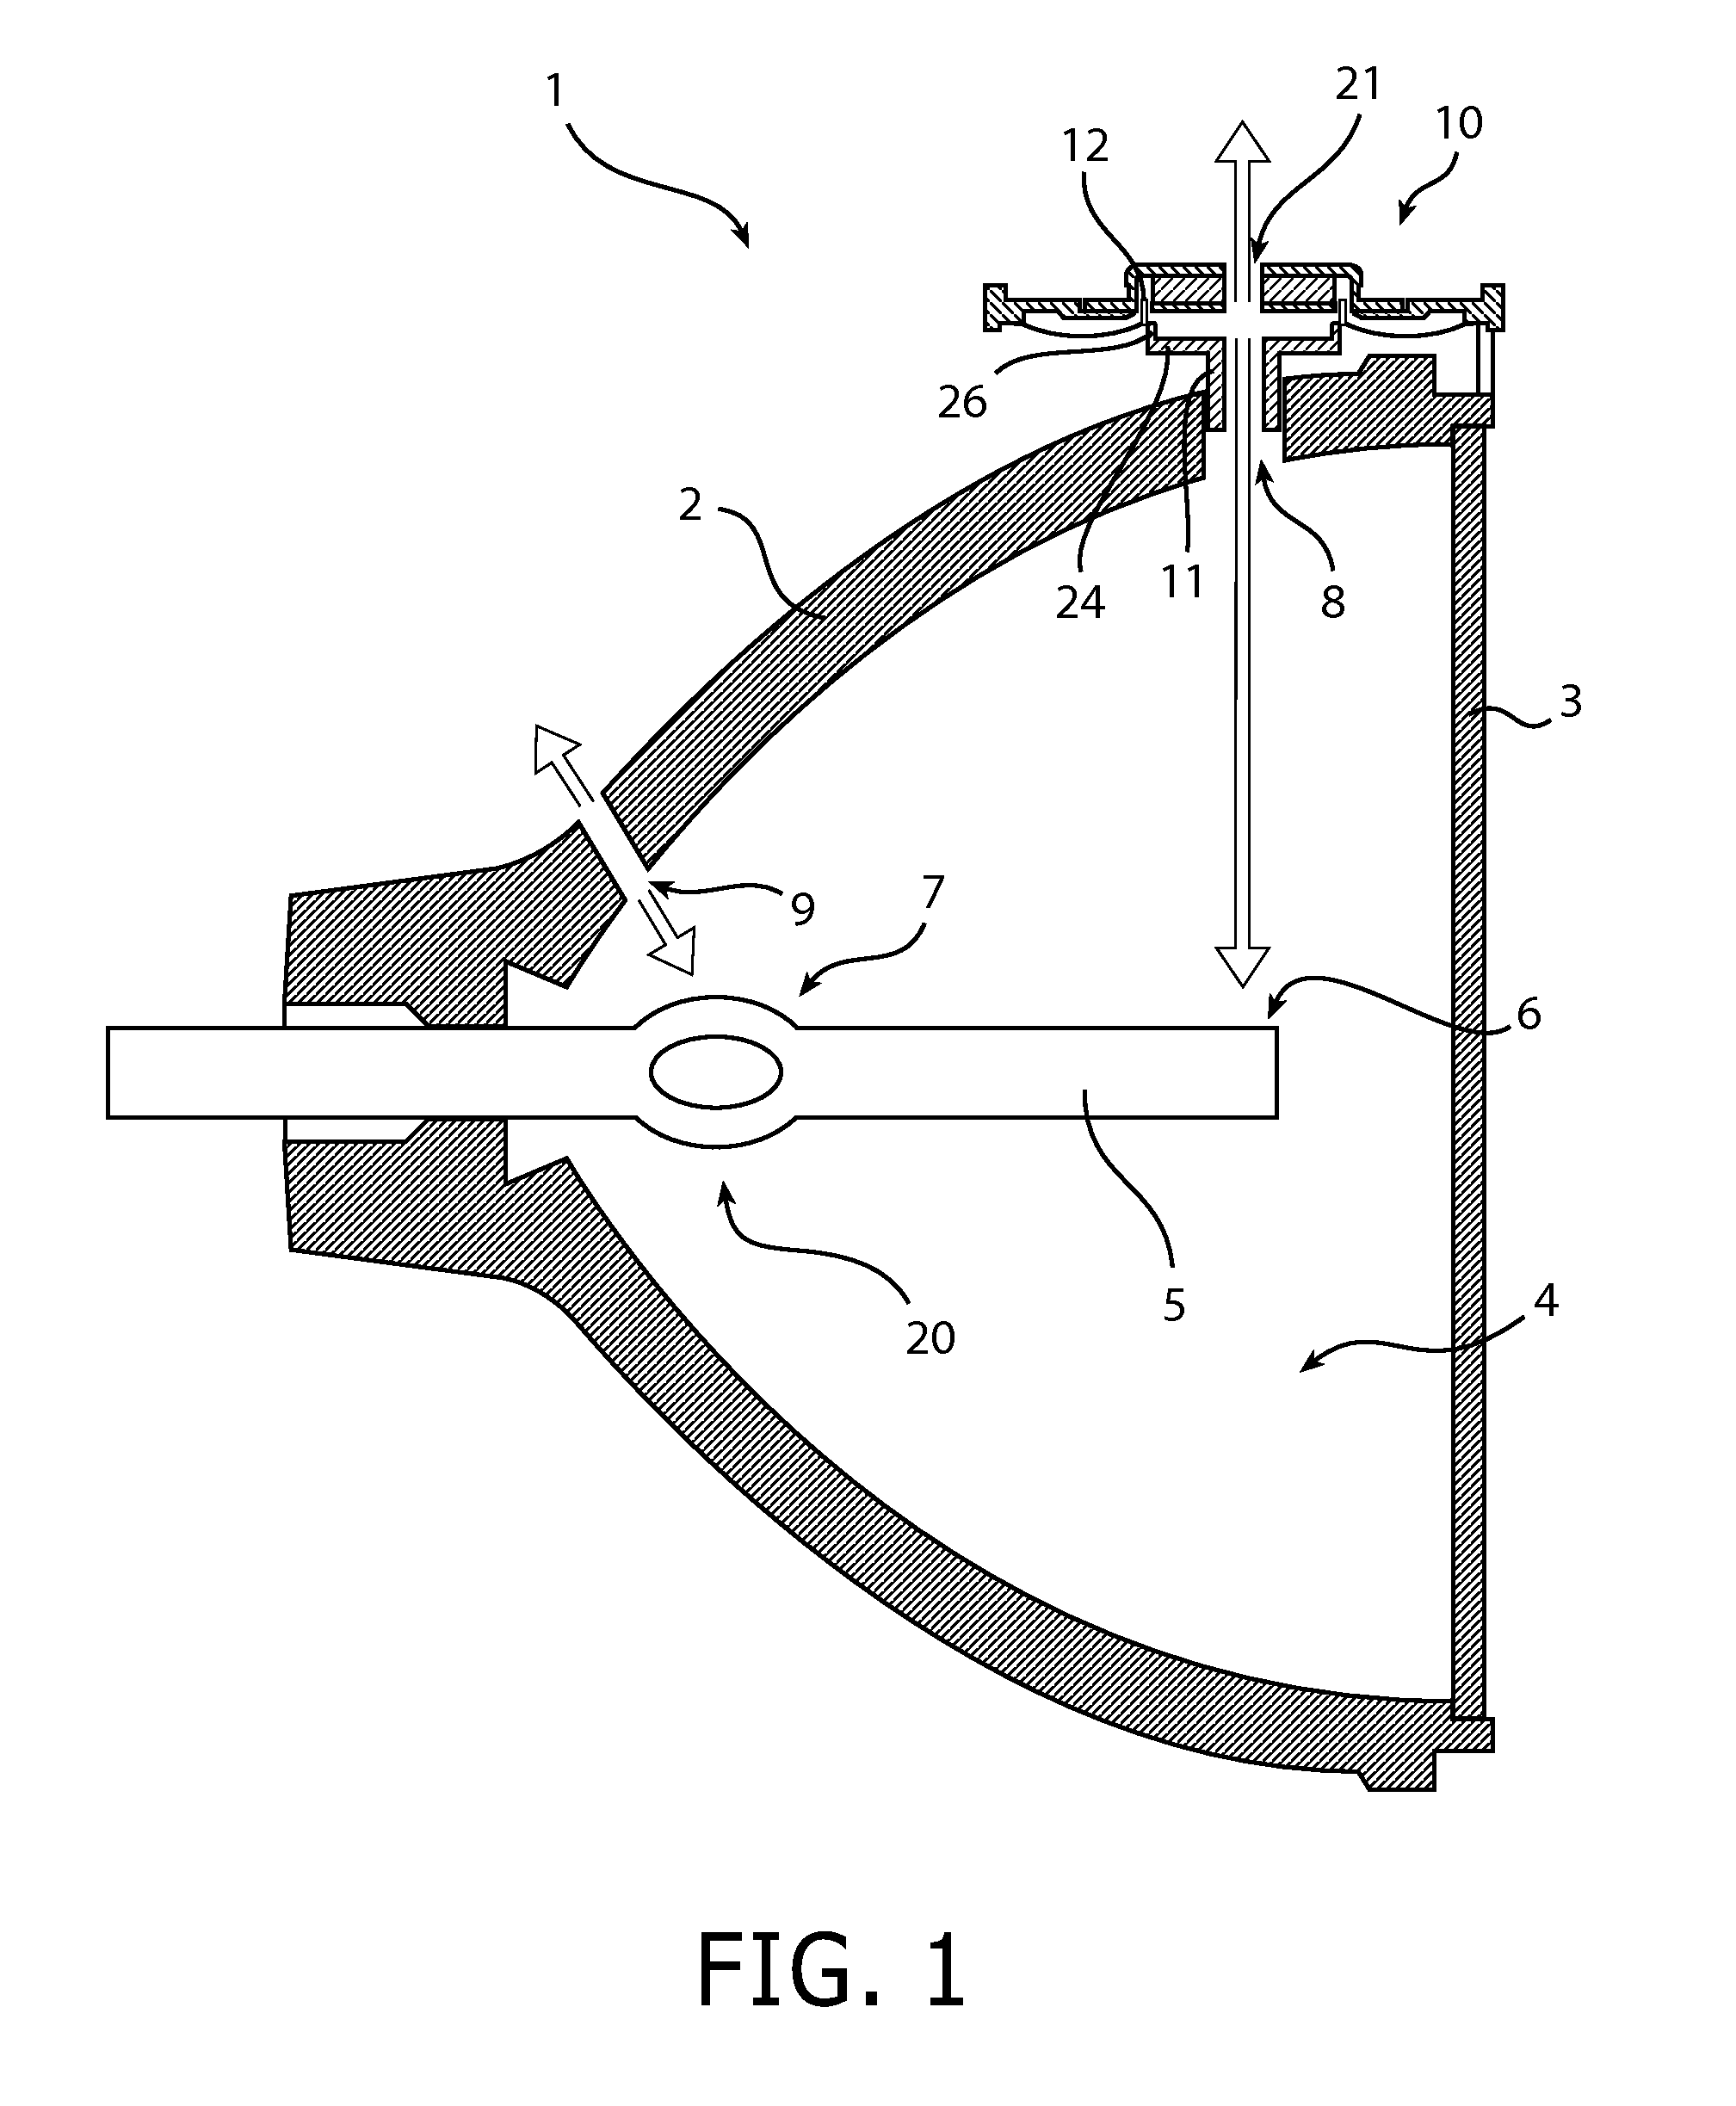 Cooling device utilizing internal synthetic jets